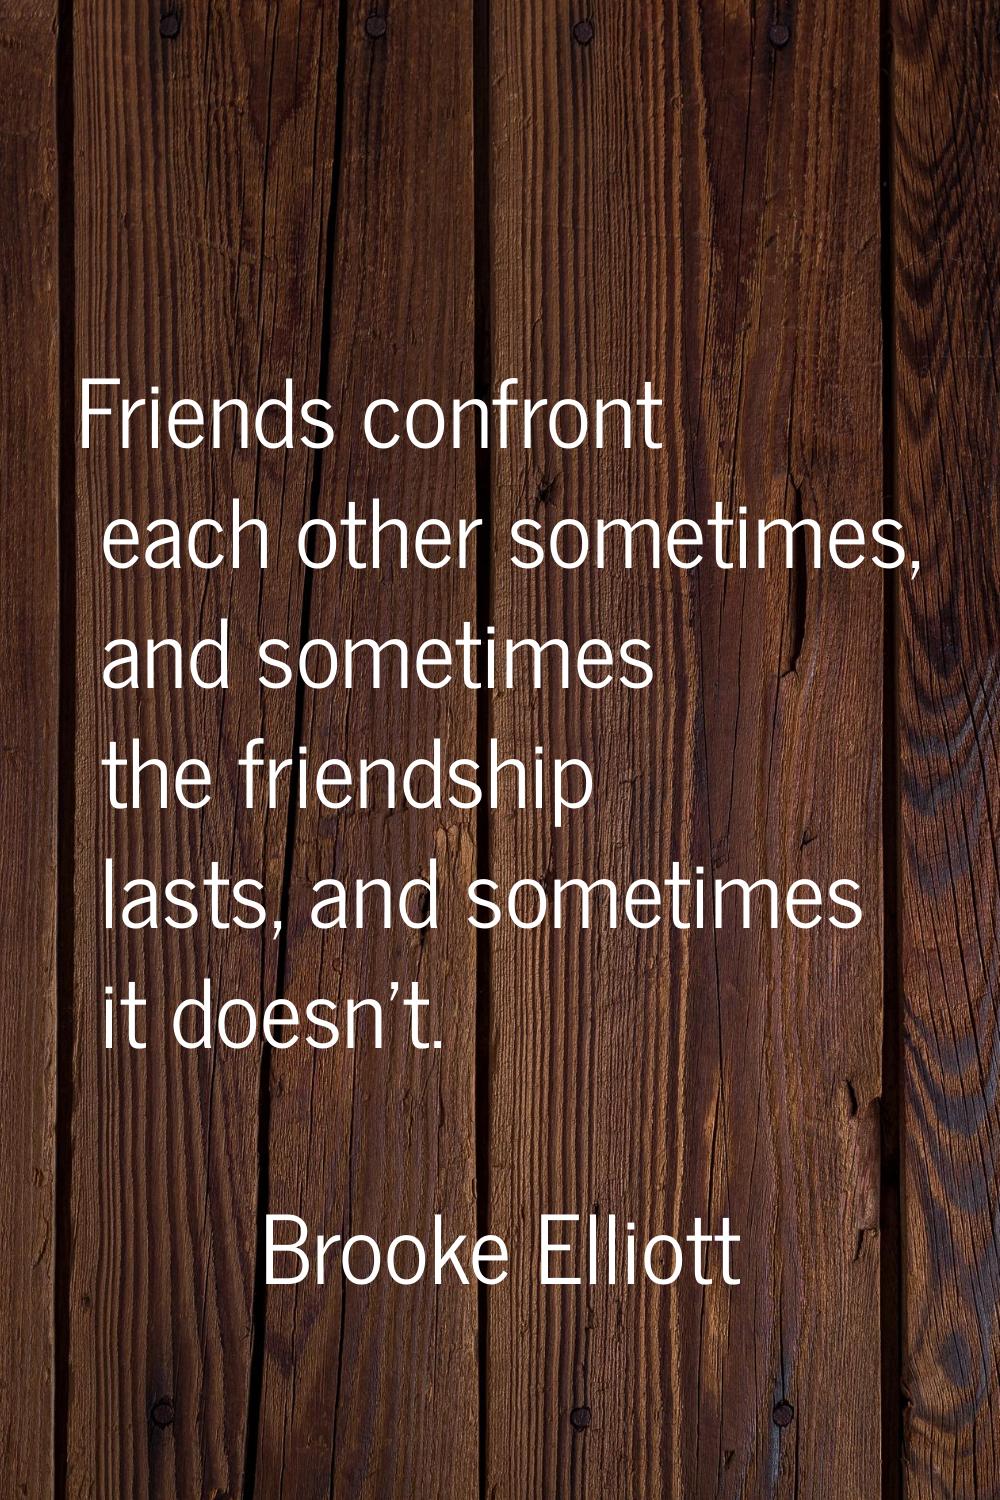 Friends confront each other sometimes, and sometimes the friendship lasts, and sometimes it doesn't